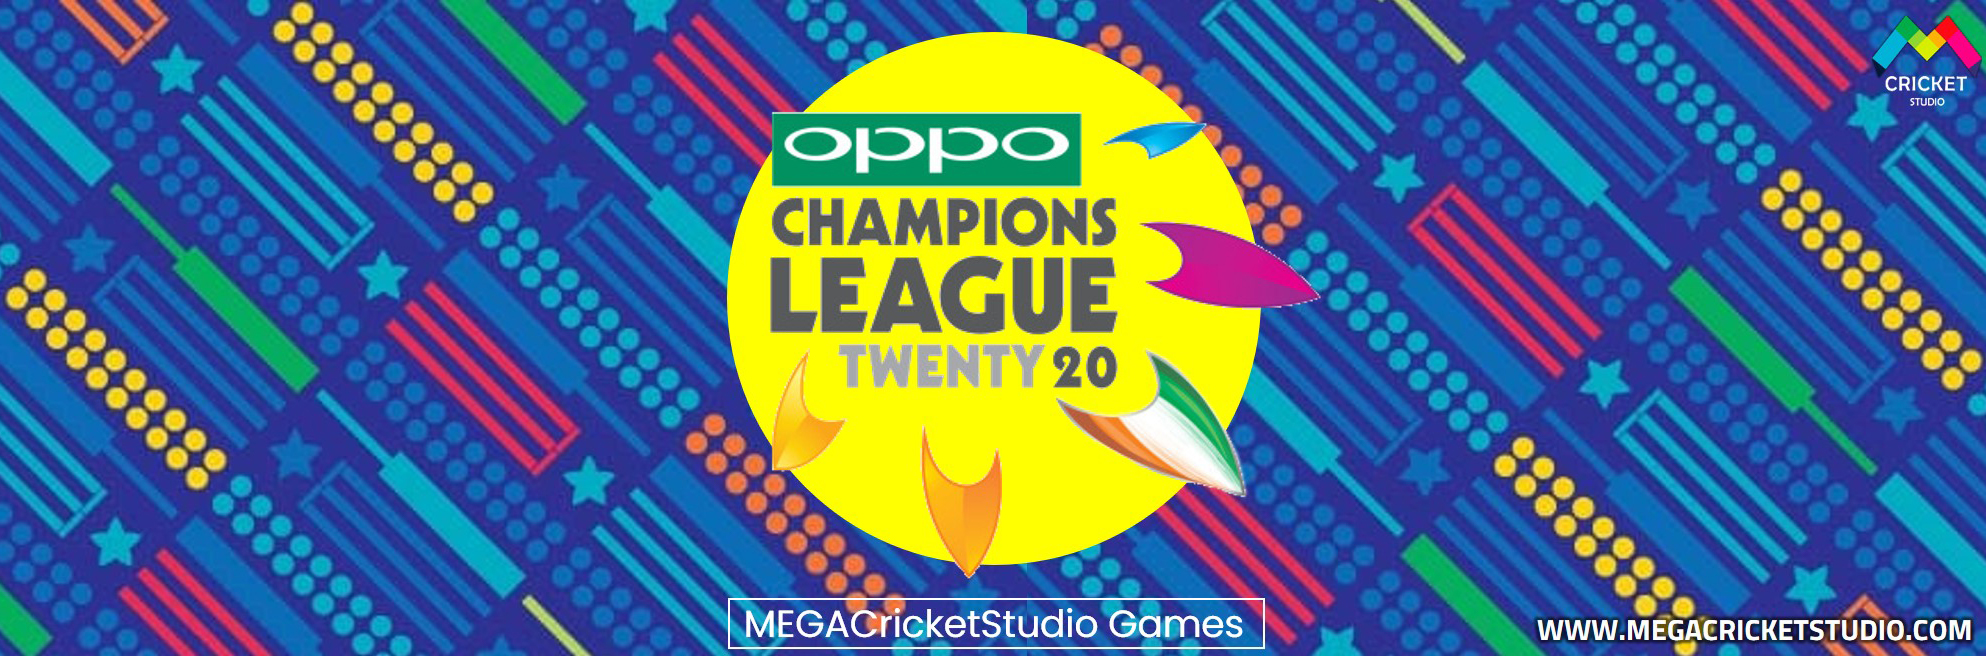 Oppo Champions League T20 2014 Patch for EA Cricket 07